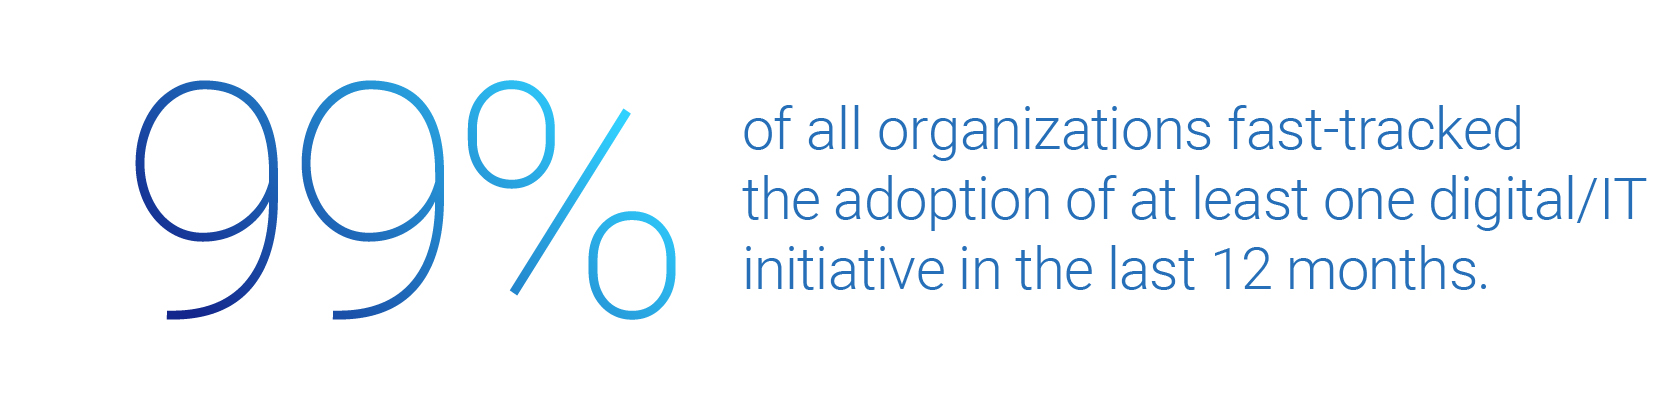 99% of orgs accelerated digital initiatives